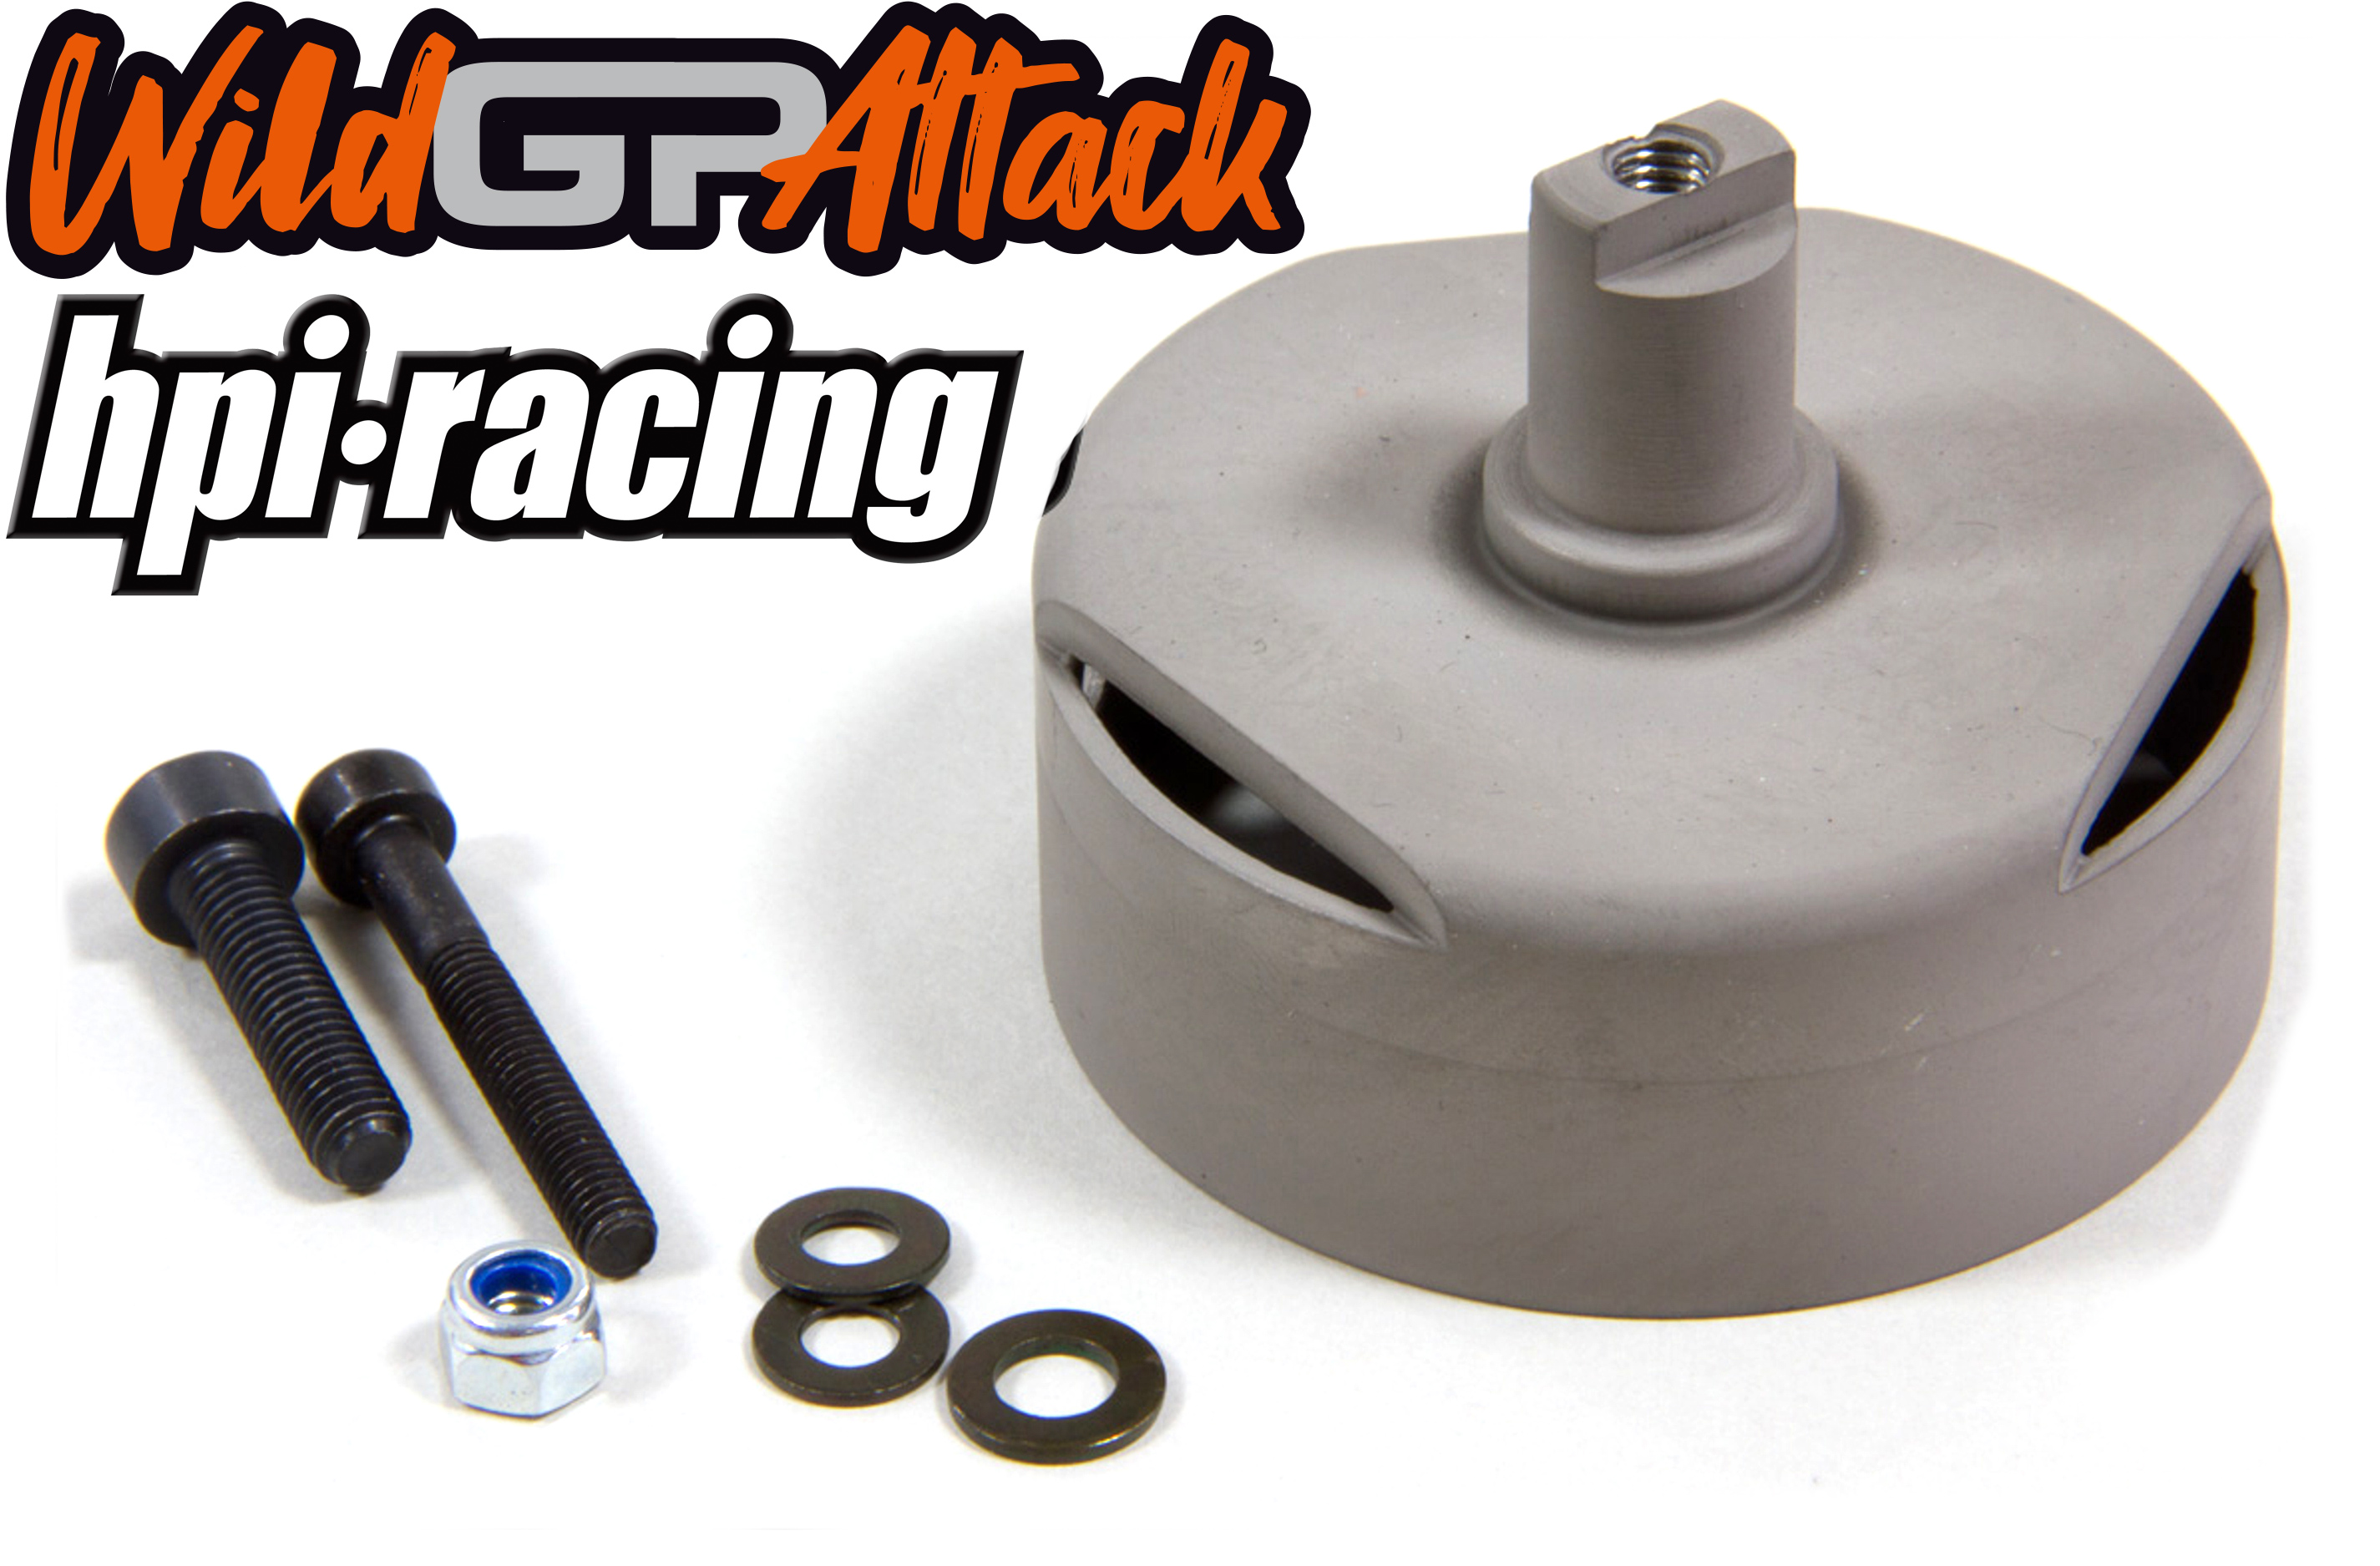 y0729 Gas-nitrited tuning clutch bell for HPI Baja, Carson Wild GP Attack models, 1 pce.